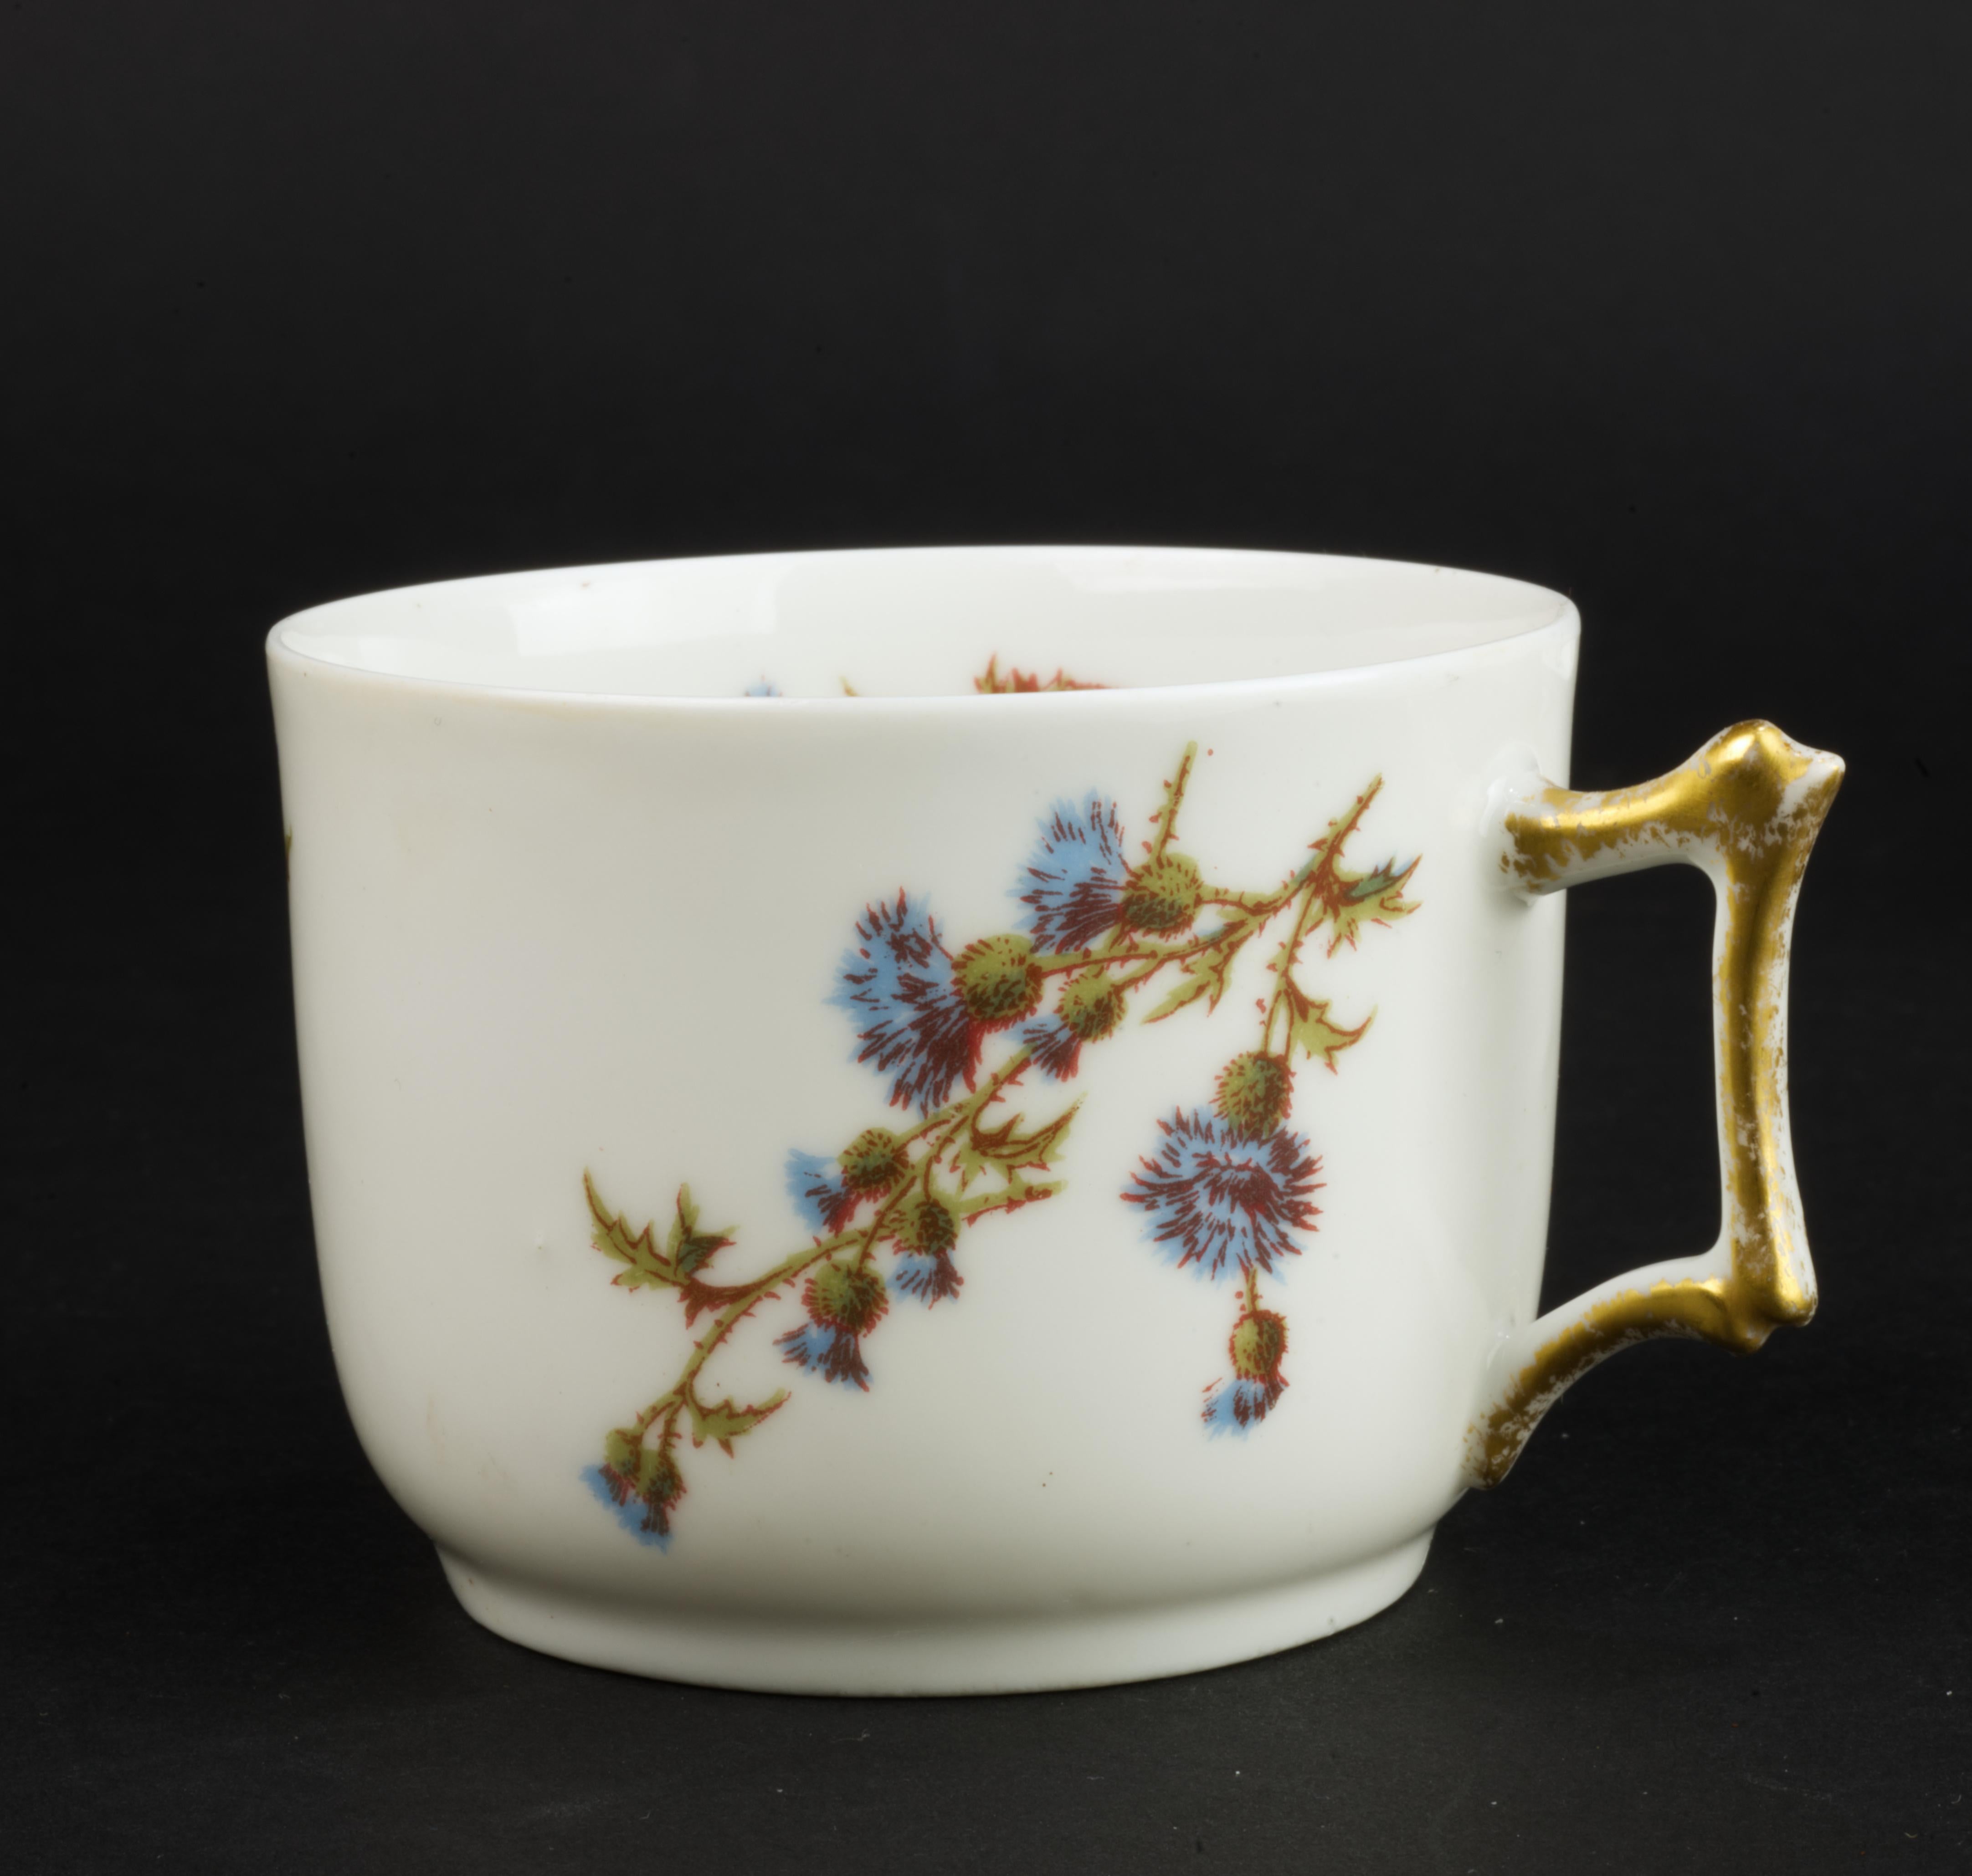 Porcelain Guerin &Co Limoges France Set of 3 Cups and Saucers Bone China, 1891-1900 For Sale